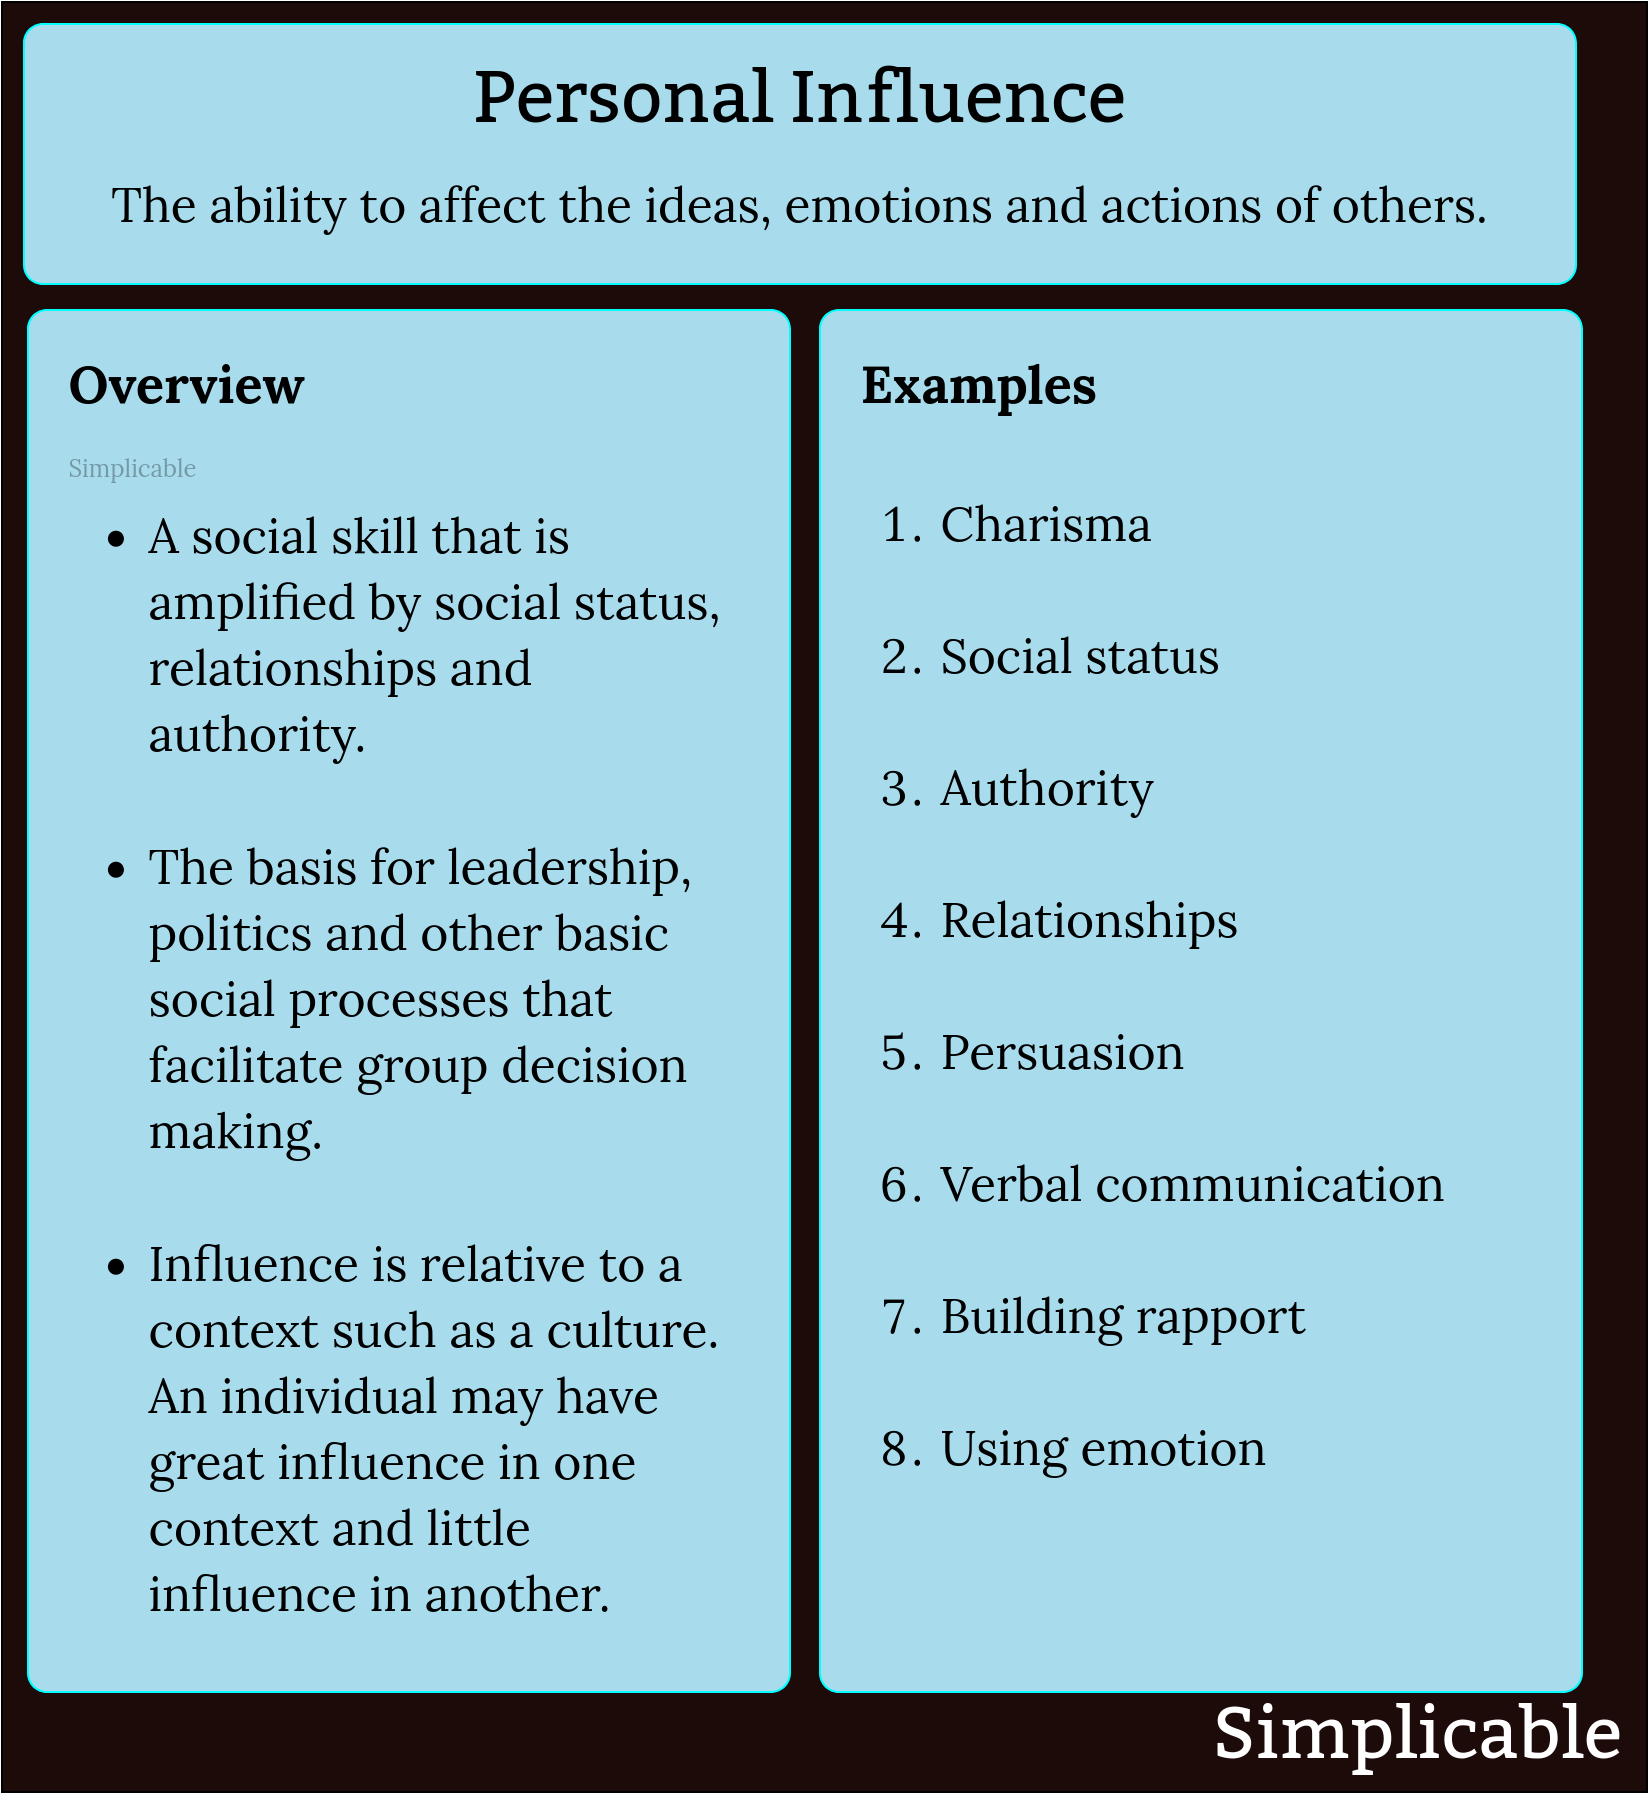 overview of personal influence with examples